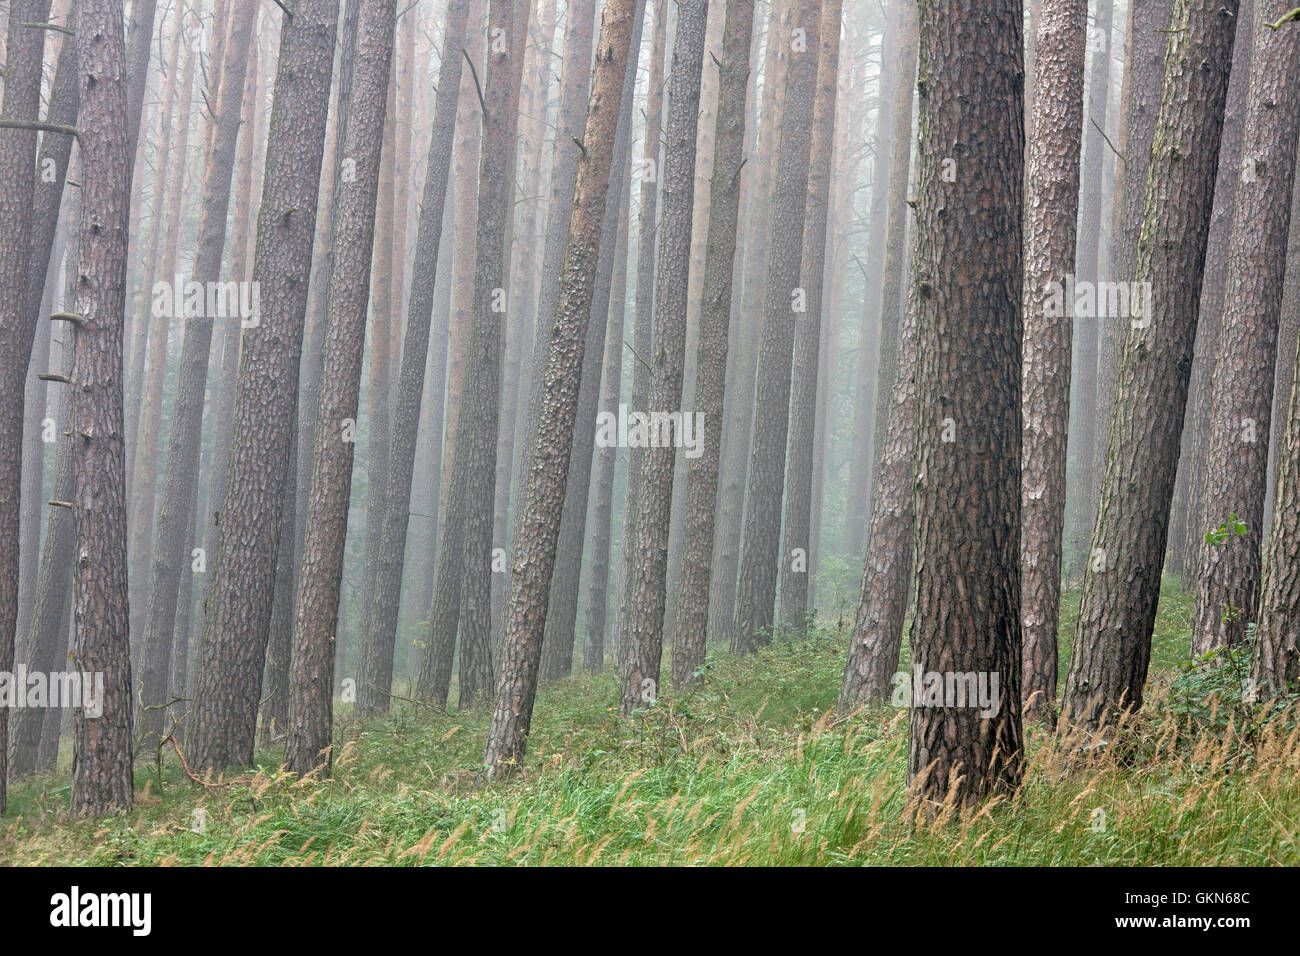 Scots Pine (Pinus sylvestris) tree trunks in coniferous forest in the mist Stock Photo